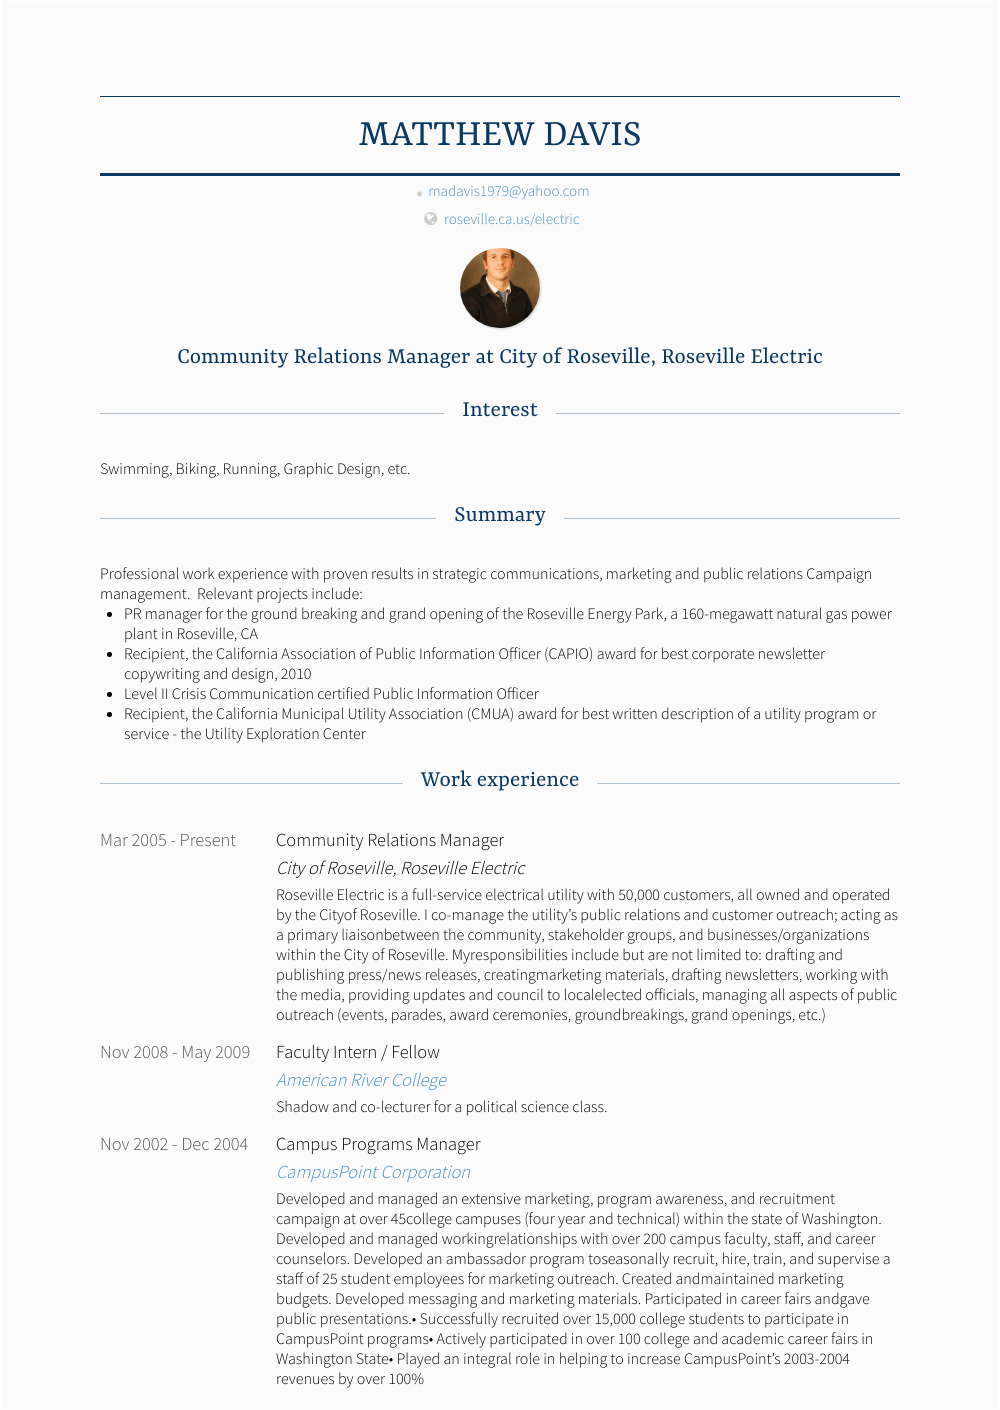 Sample Resume for Community Relations Manager Munity Relations Manager Resume Samples and Templates